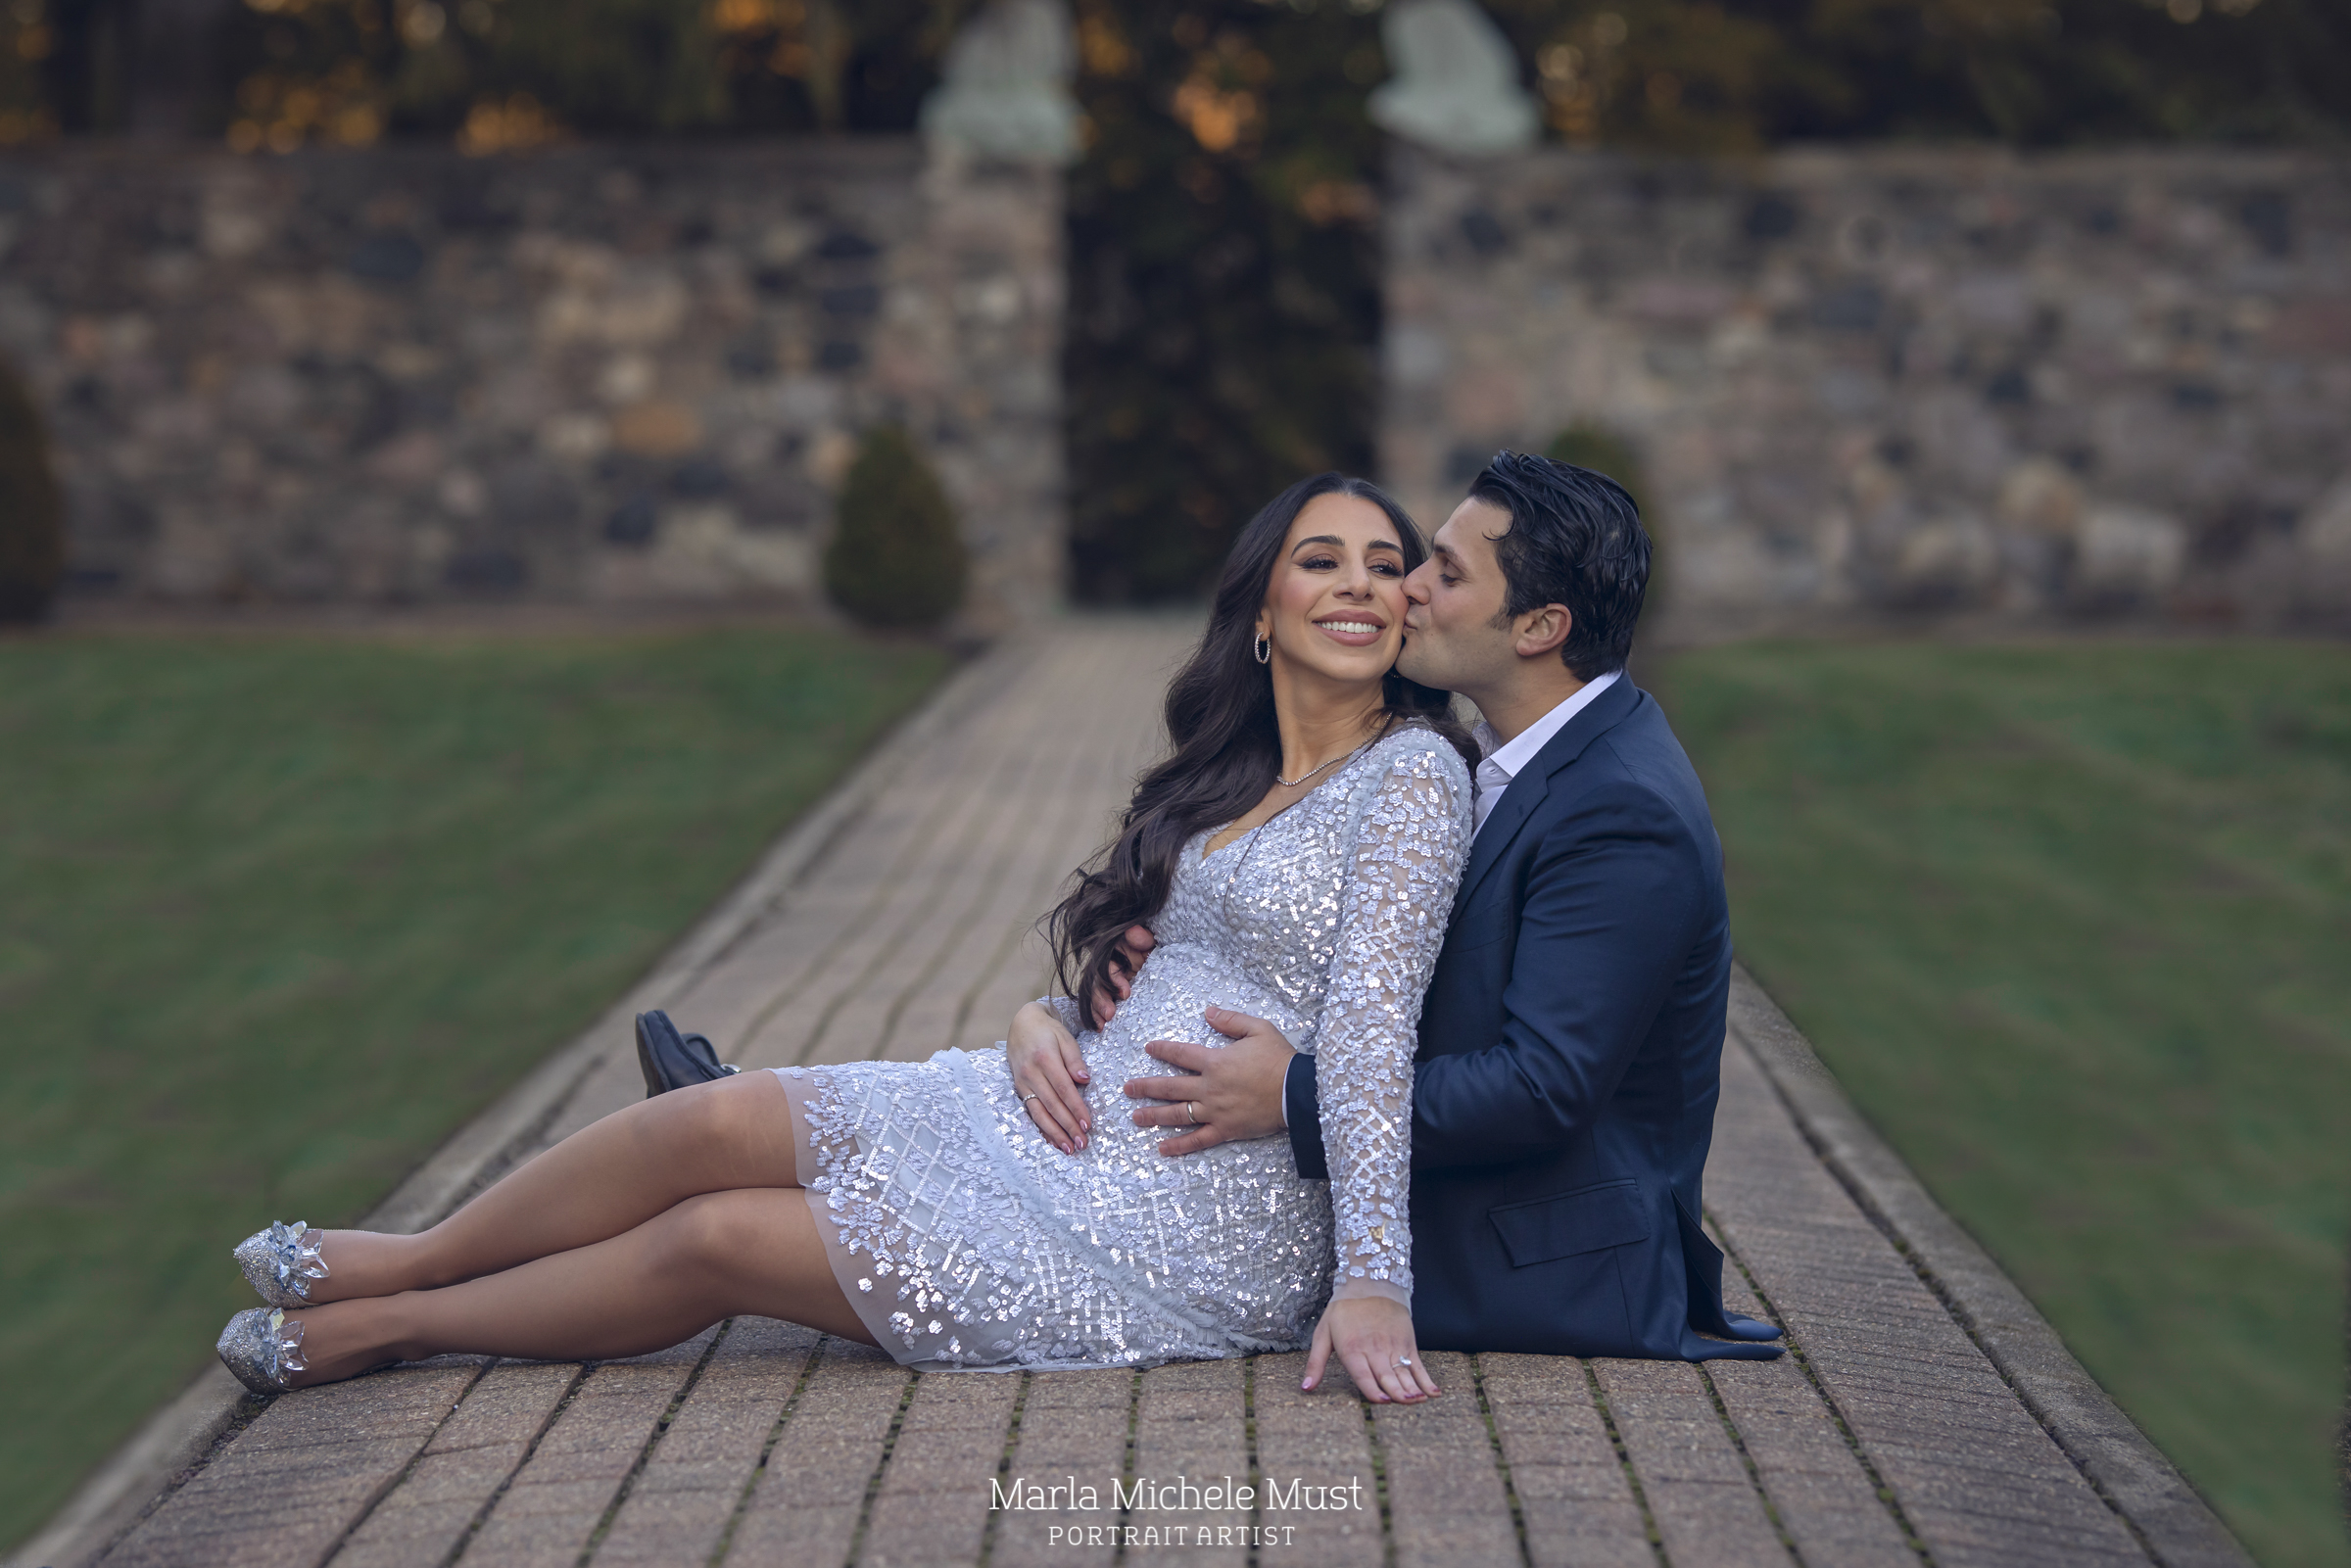 A formally dressed expecting mother and her partner sit together on a pathway in a Detroit park for a maternity photoshoot; a moment captured by a talented Michigan maternity photographer. .